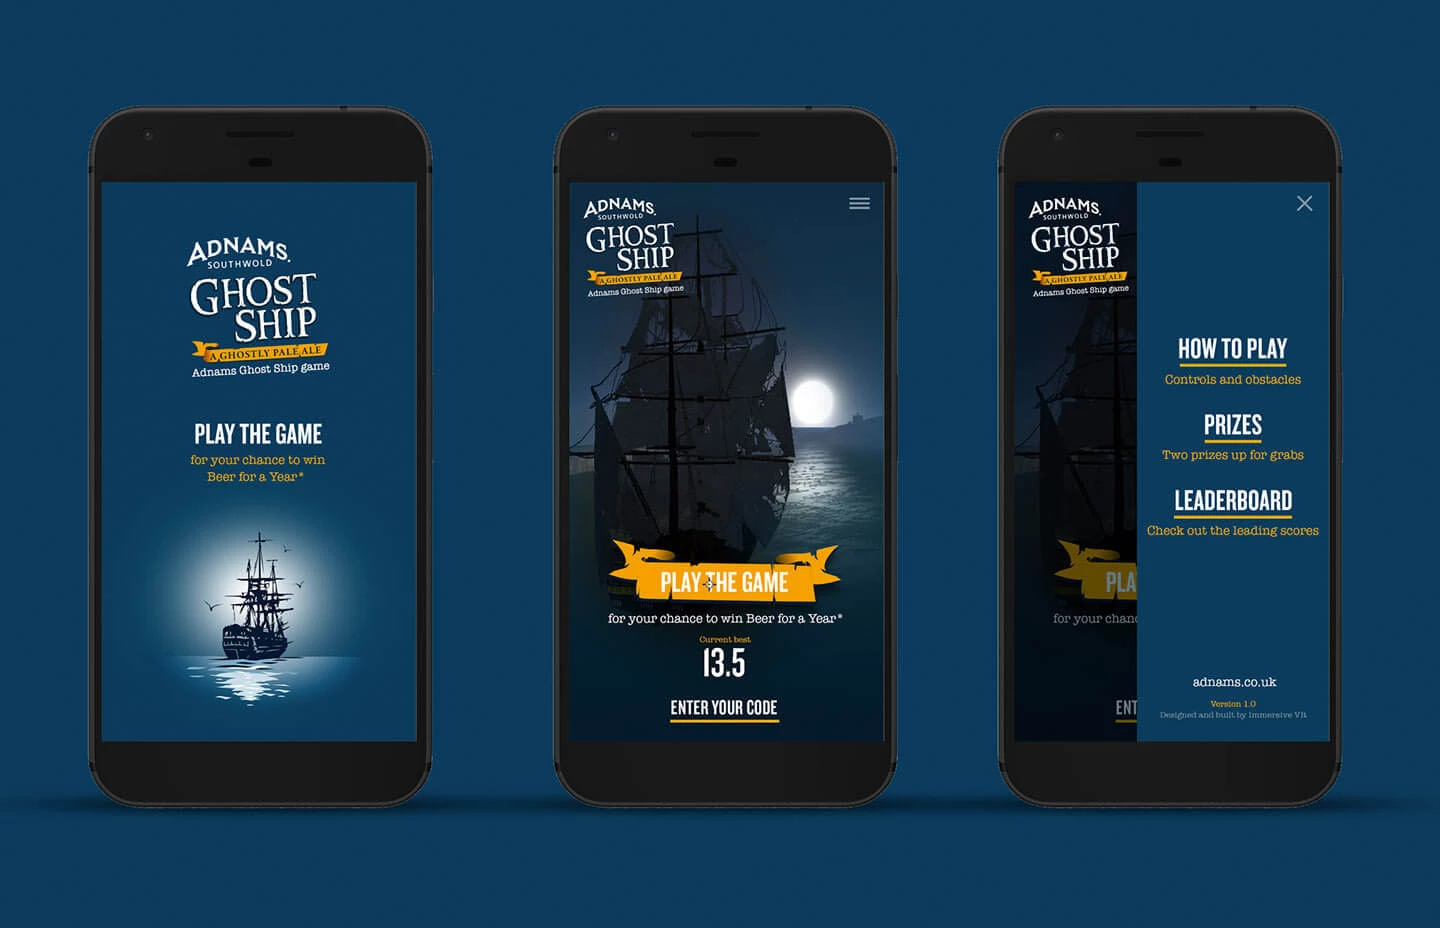 Three screens from the Adnams Ghost Ship game on mobile devices